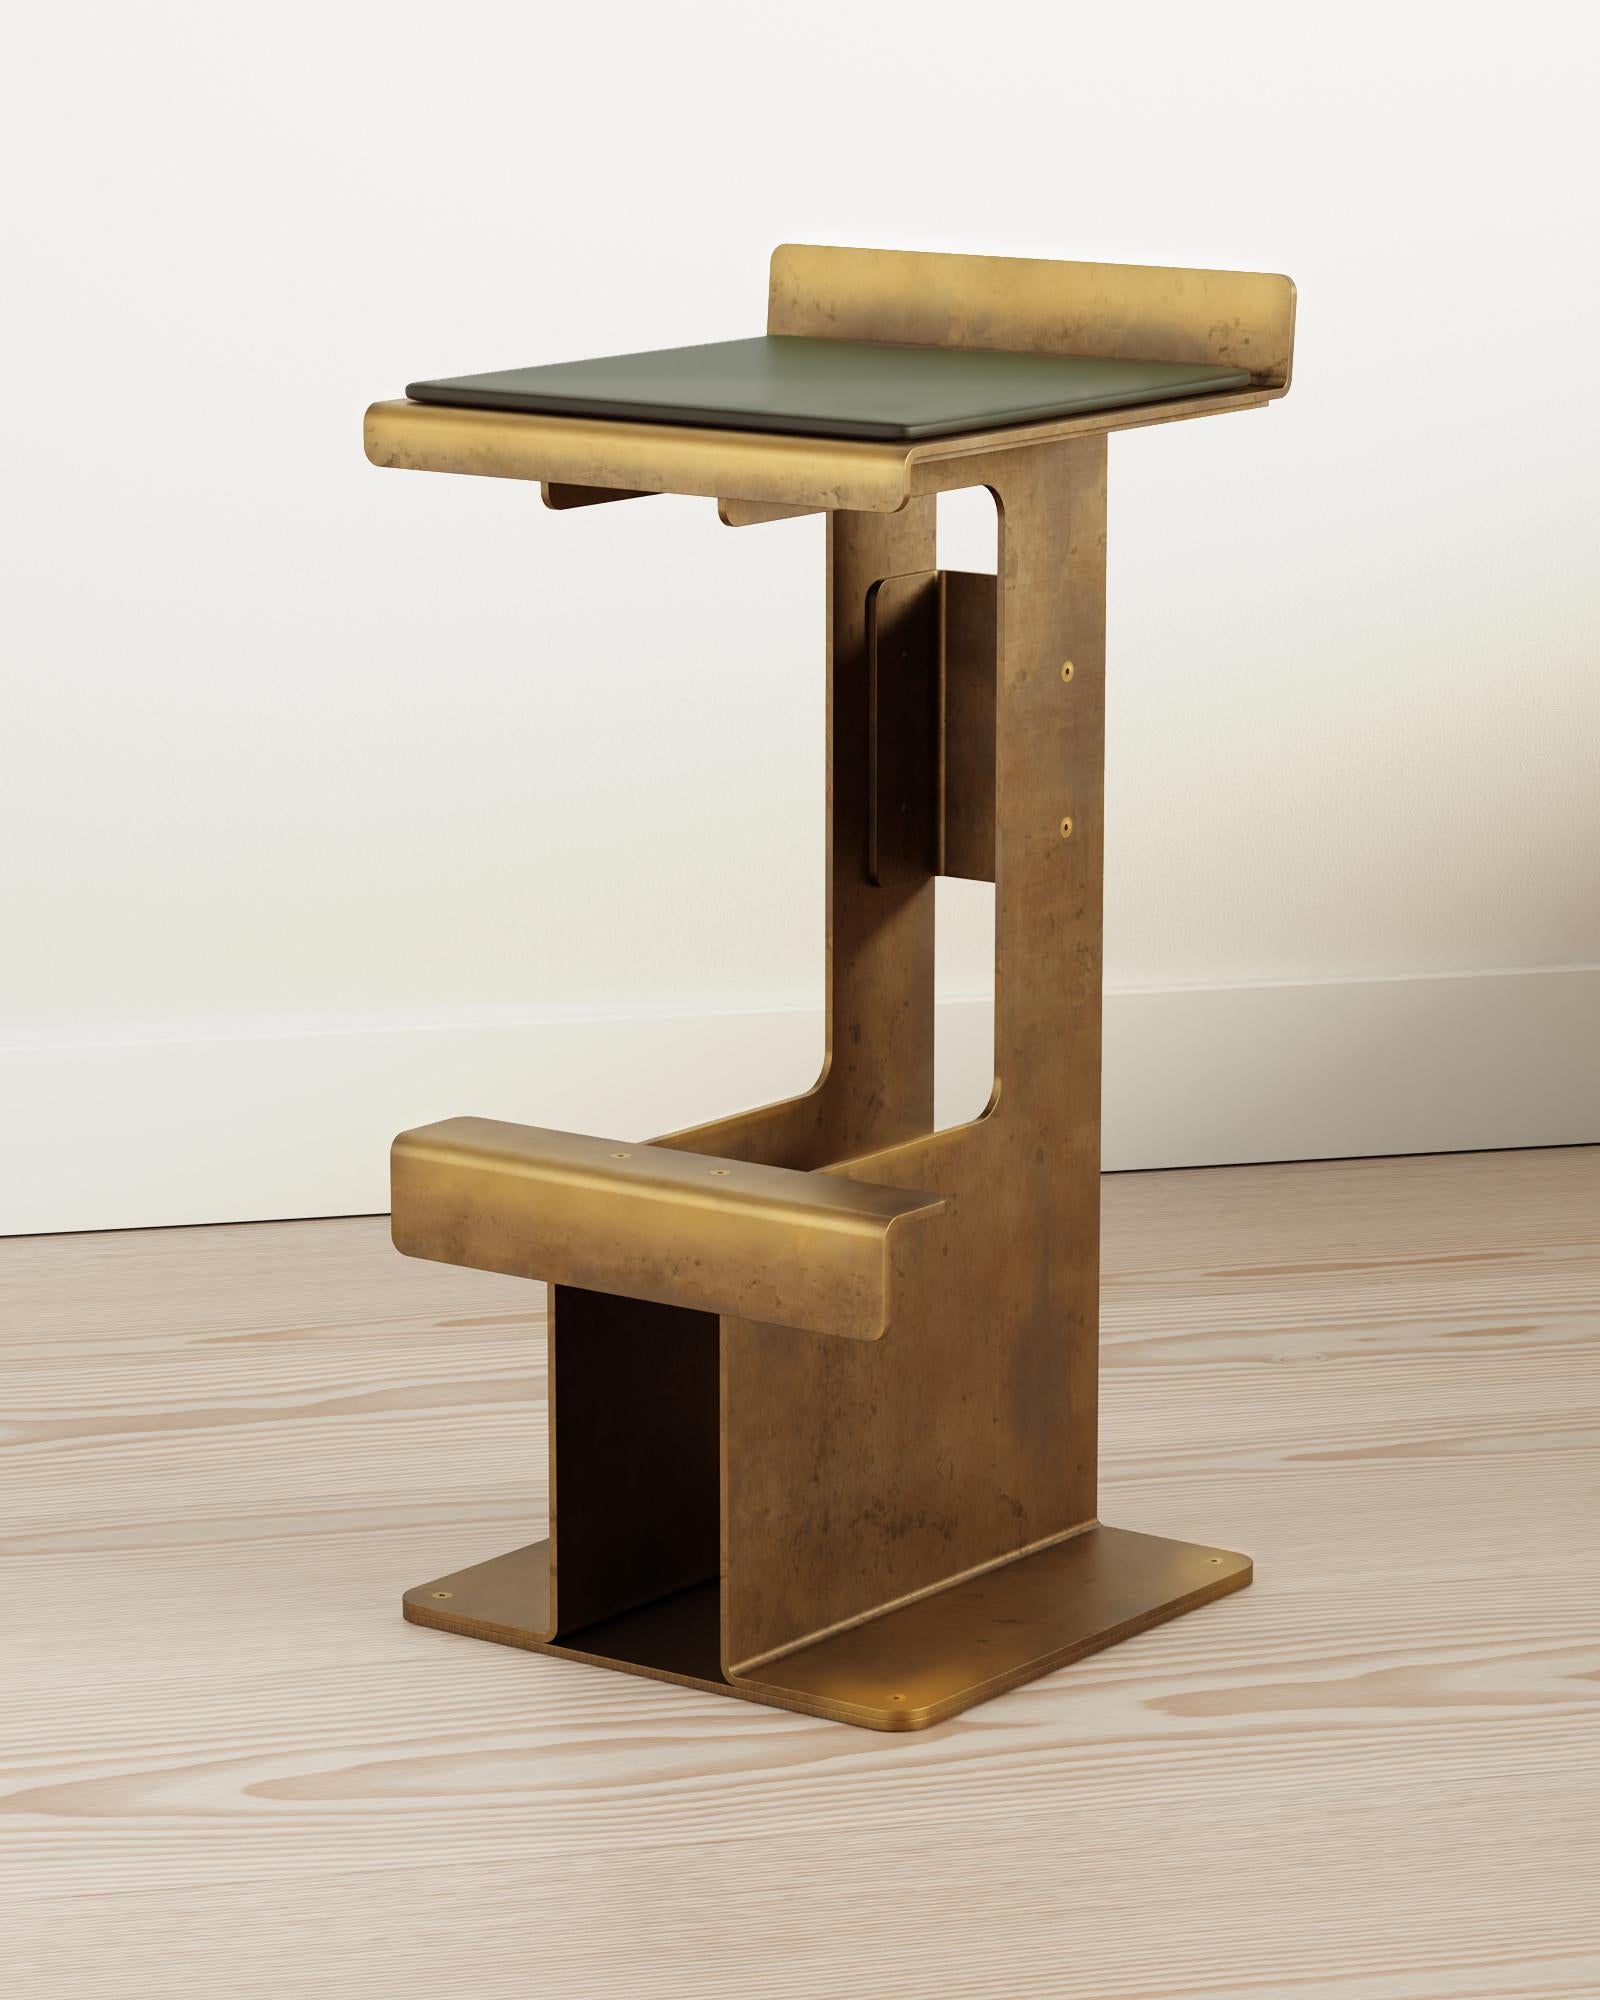 Whether you're entertaining guests or enjoying a quiet meal at home, our minimalist aluminum bar stool is the perfect choice for a stylish and functional seating solution. Order yours today and elevate your space with the beauty and functionality of